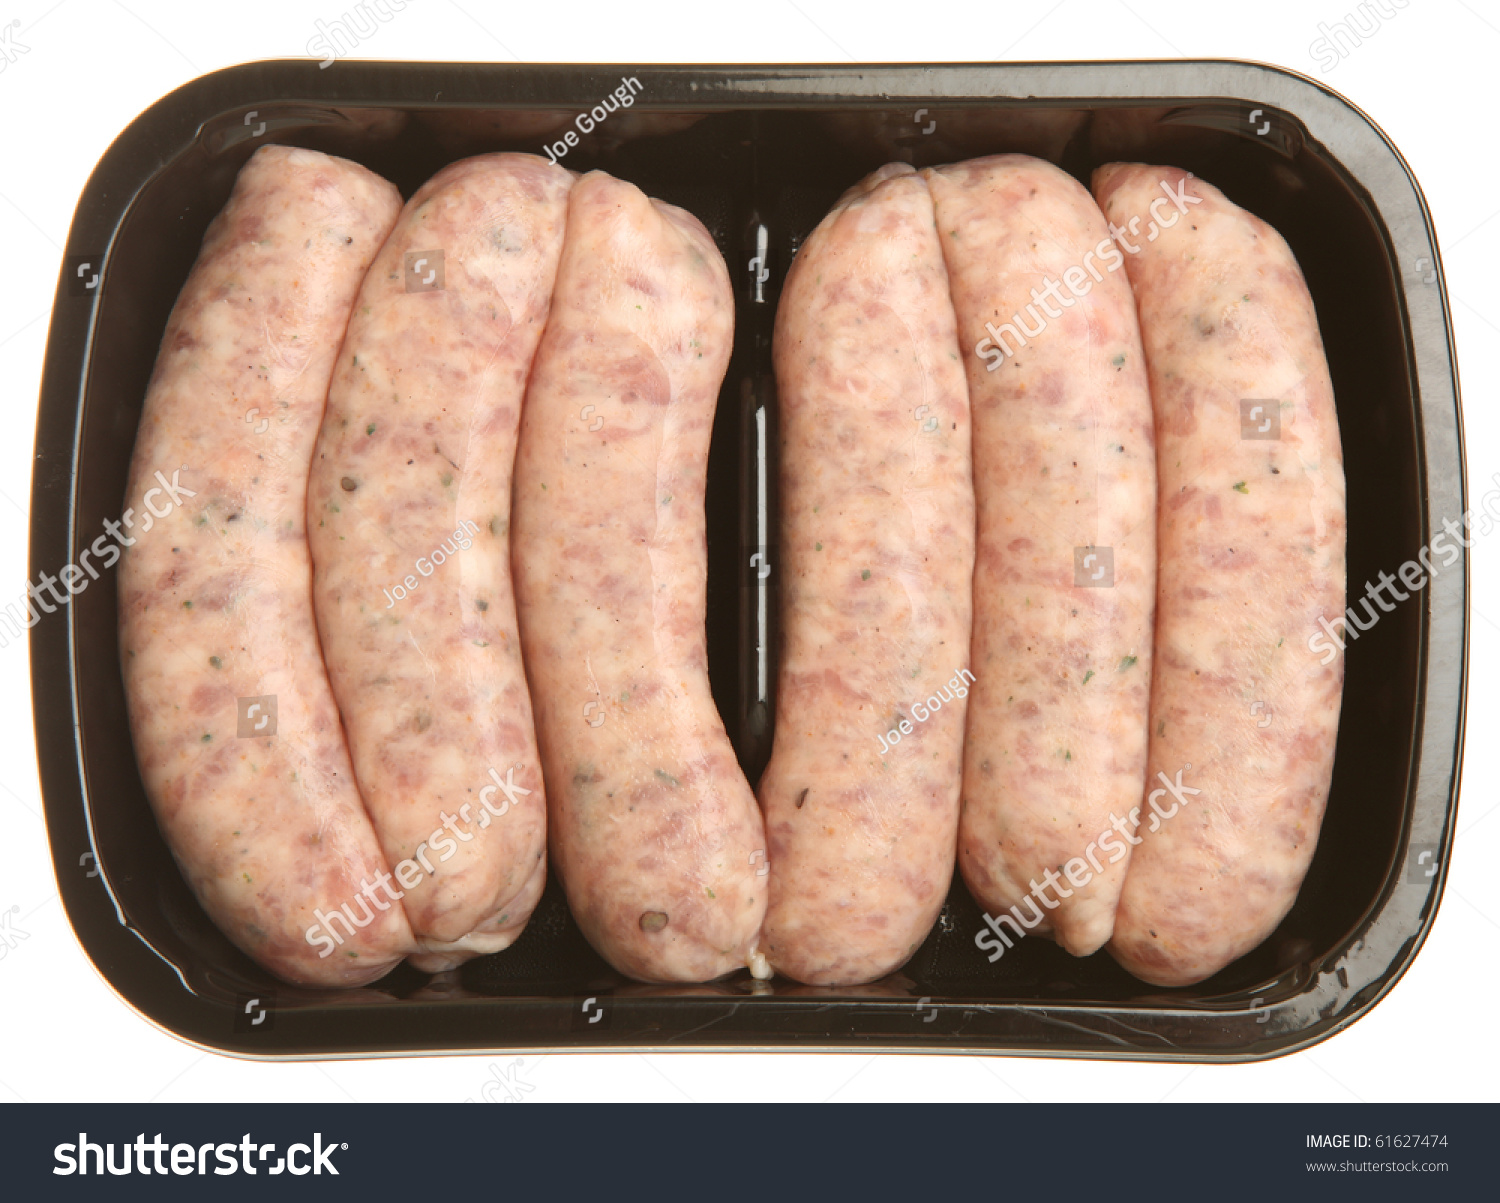 Download Pork Sausages Plastic Packaging Tray Food And Drink Stock Image 61627474 PSD Mockup Templates